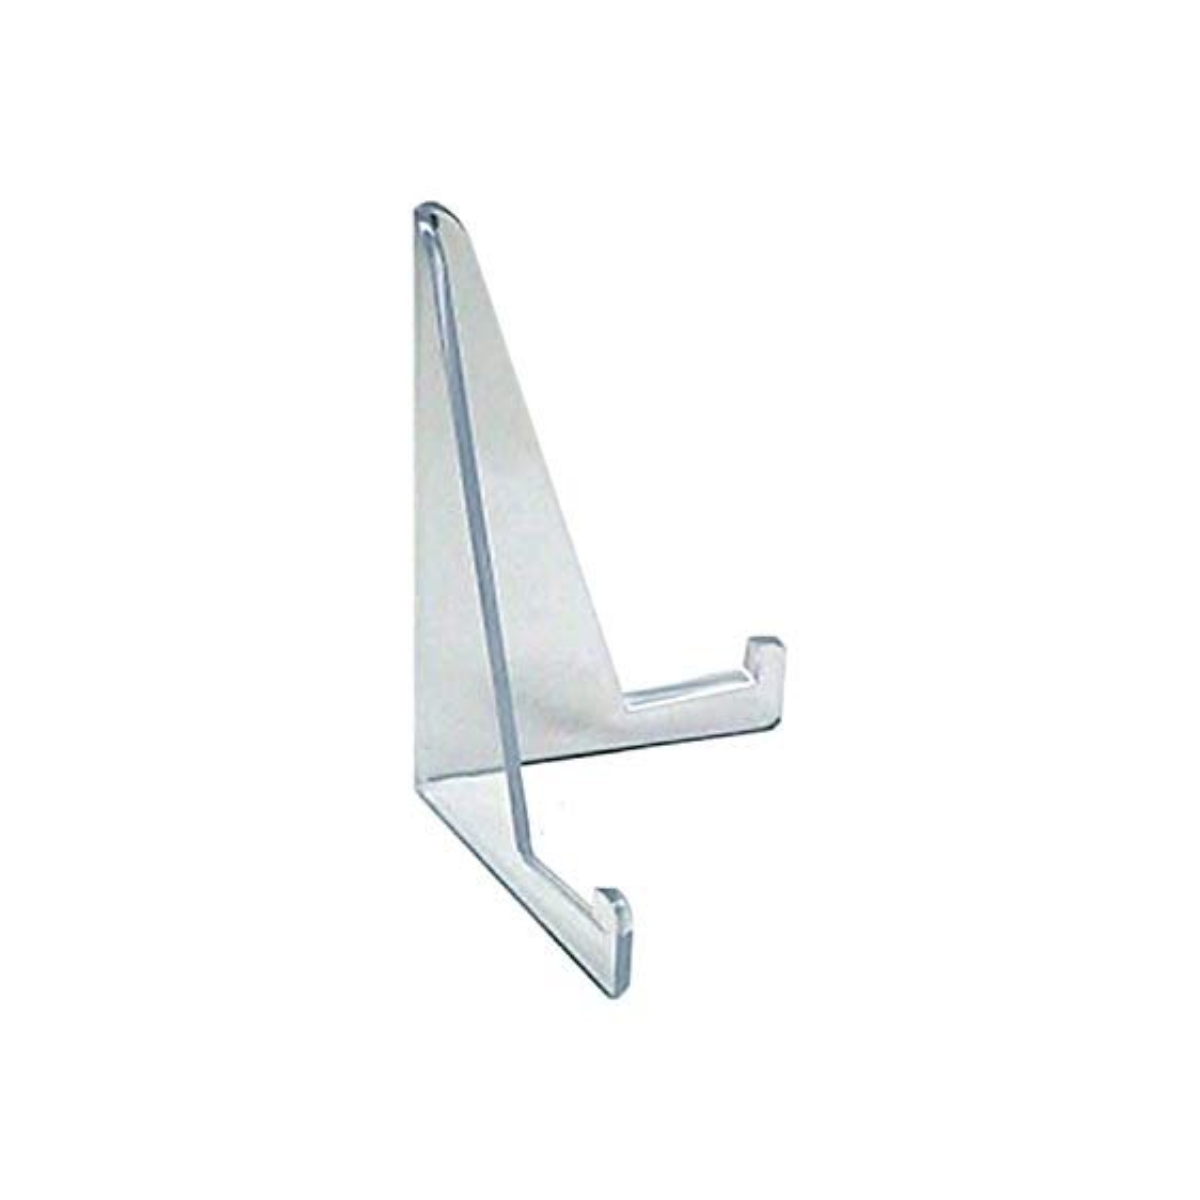 BCW Small Stand Holder-BCW Supplies-Ace Cards & Collectibles